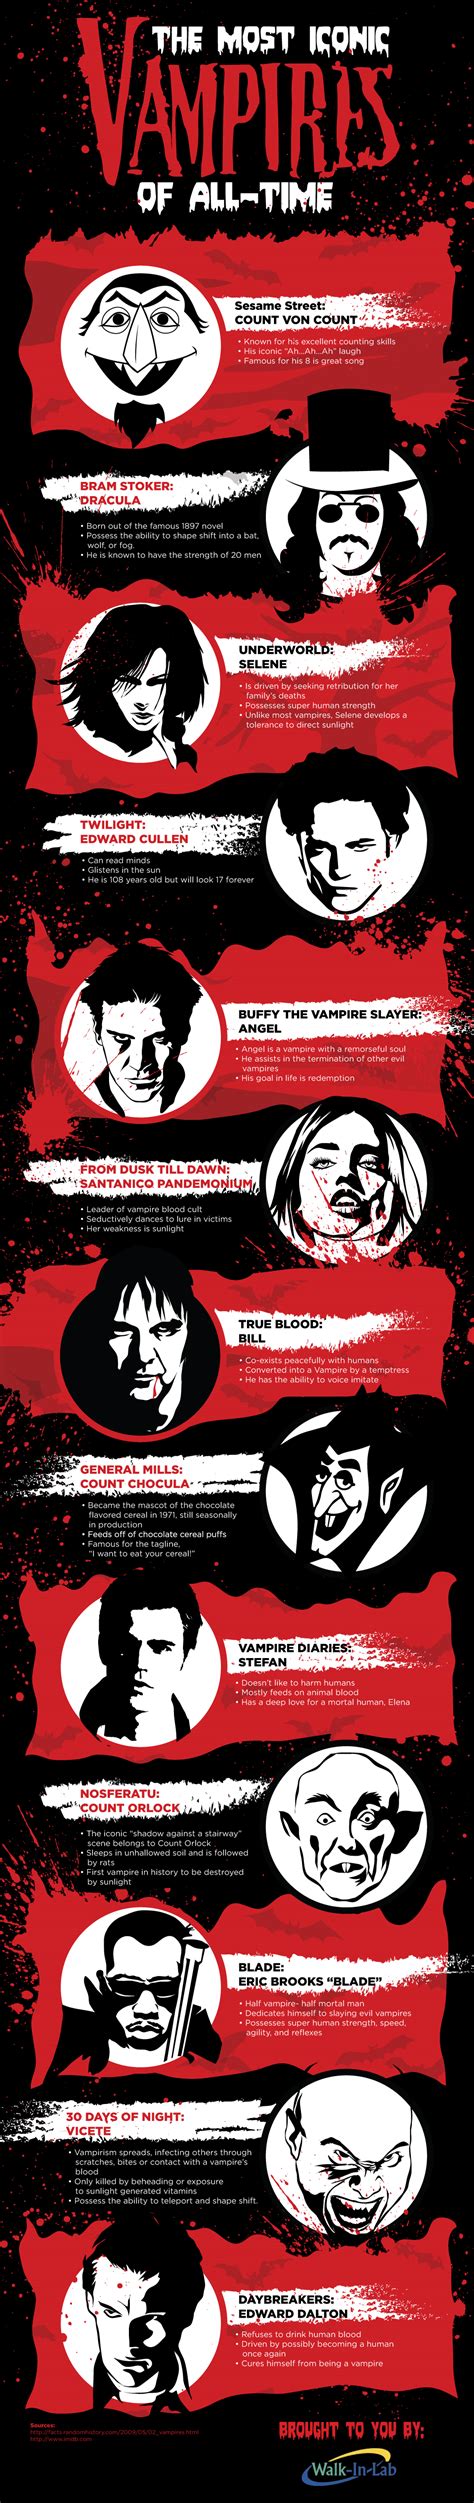 The Most Iconic Vampires Of All Time Infographic